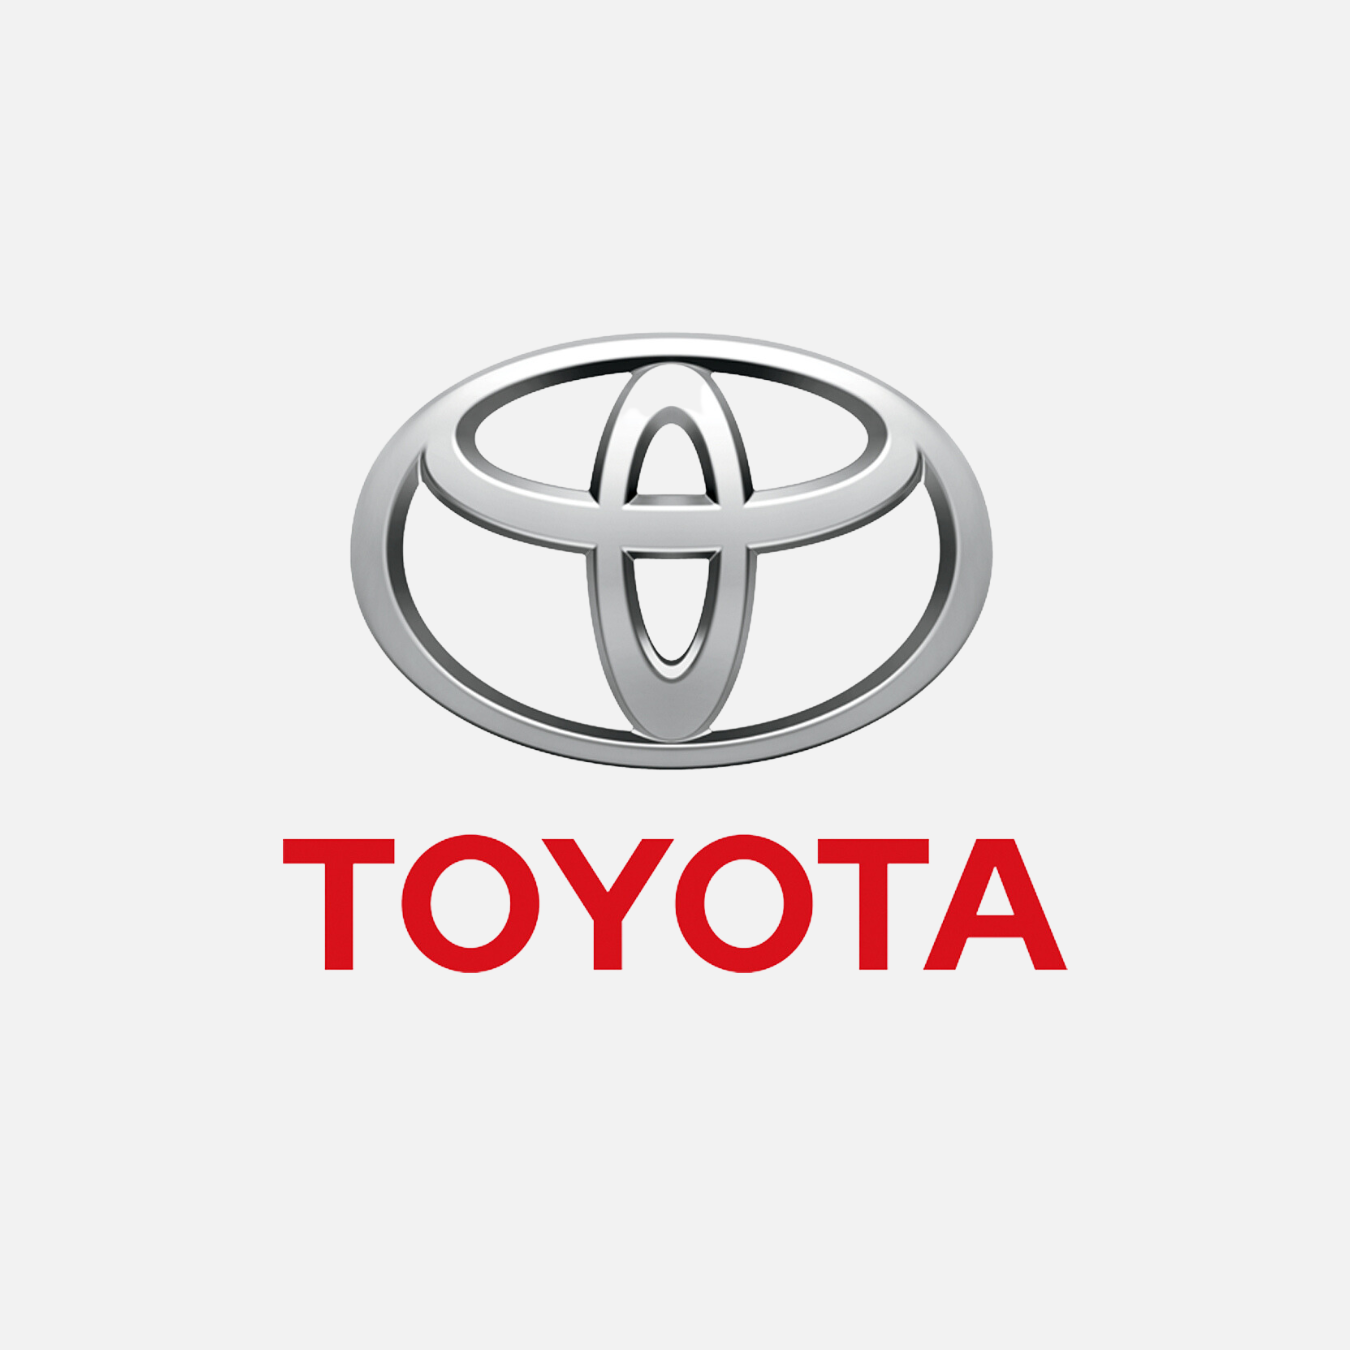 TOYOTA - PRODUCT